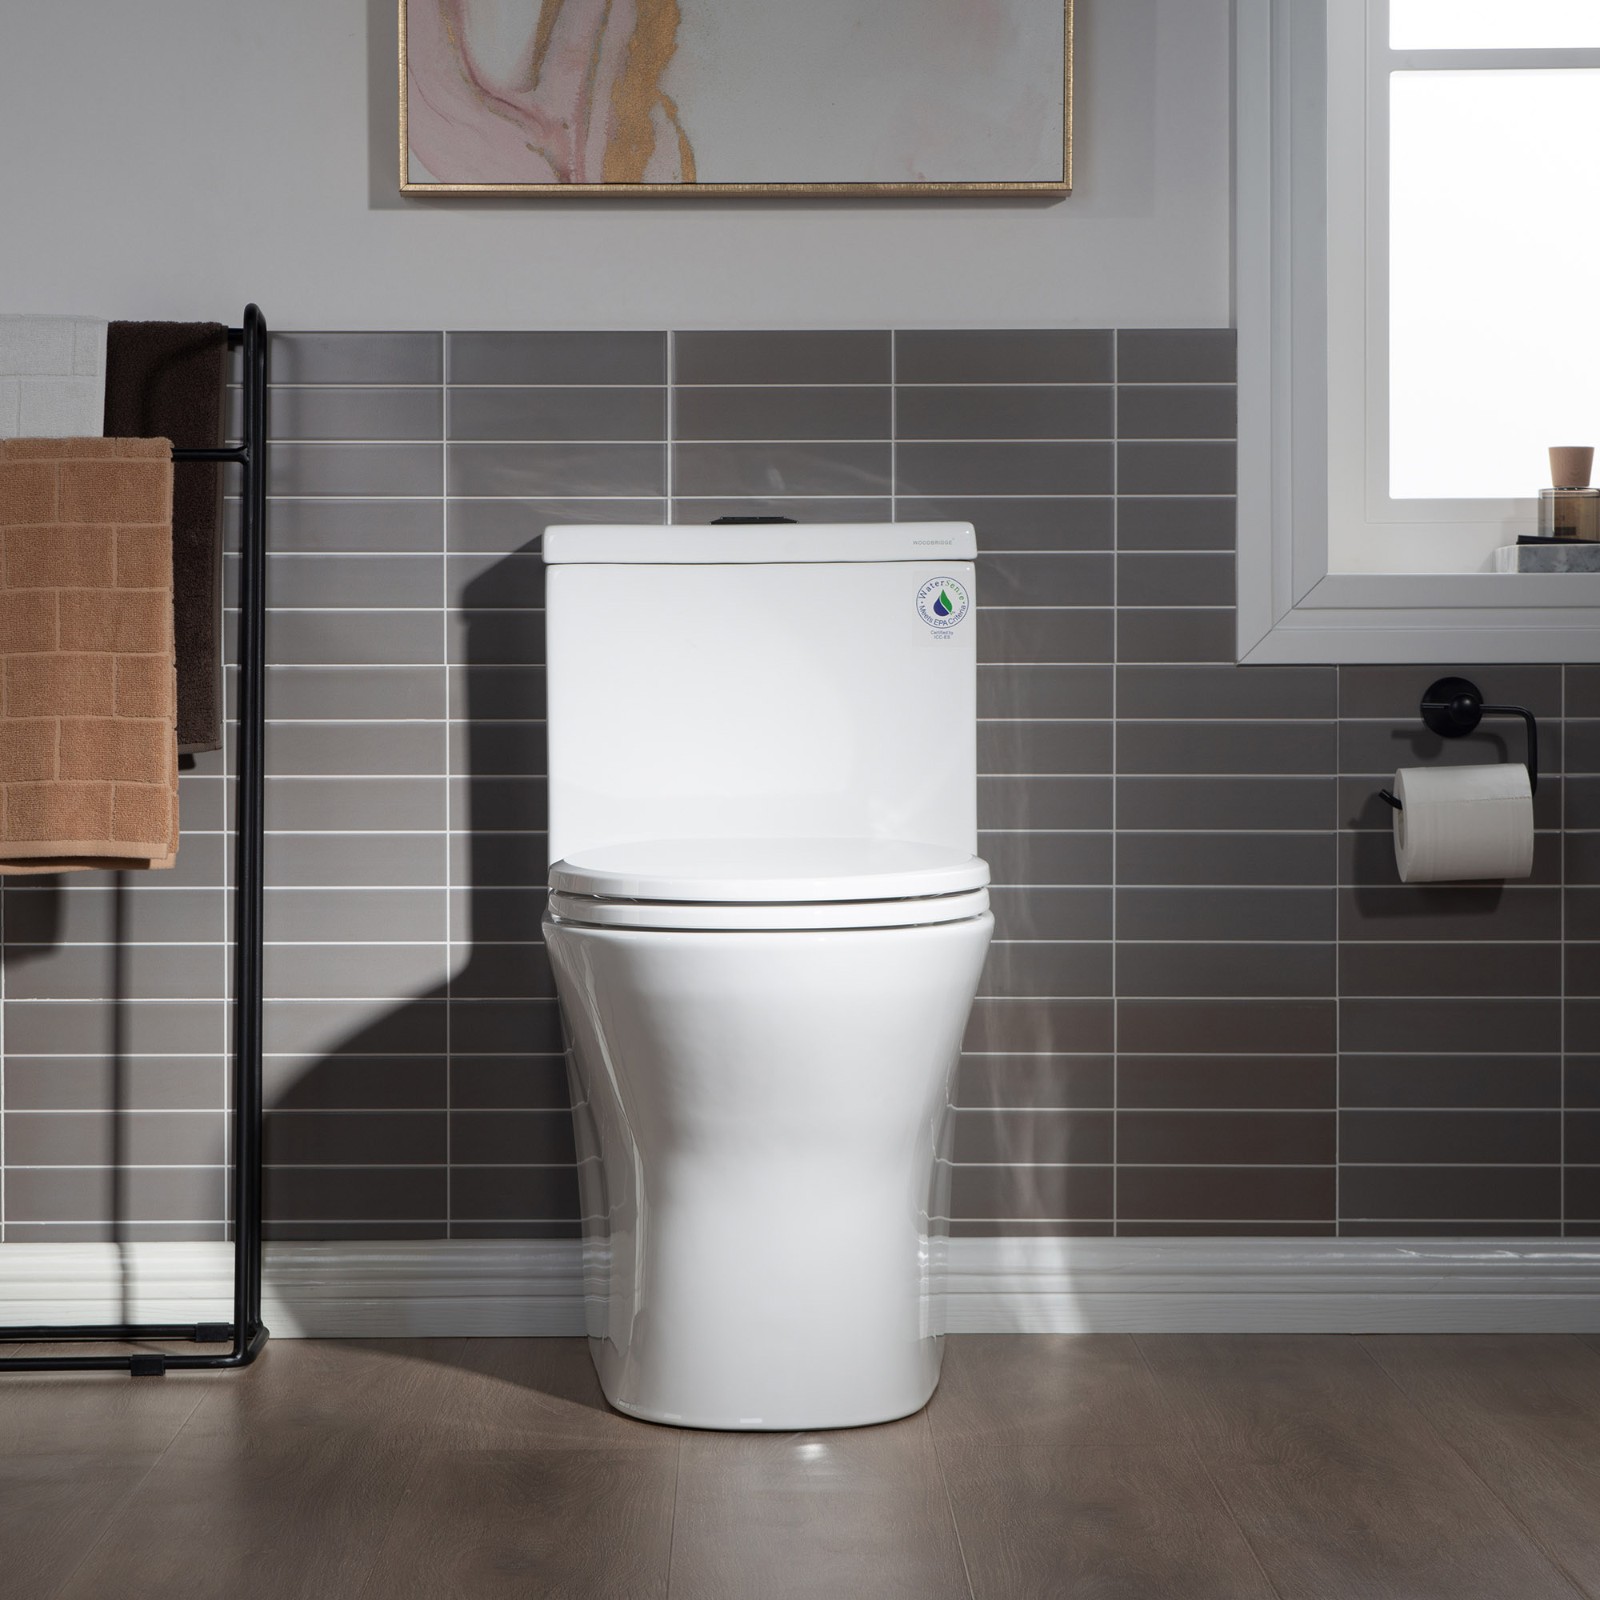  WOODBRIDGE One Piece Short Compact Bathroom Tiny Mini Commode Water Closet Dual Flush Concealed Trapway, Matte Black Button B0500-MB, White_7612